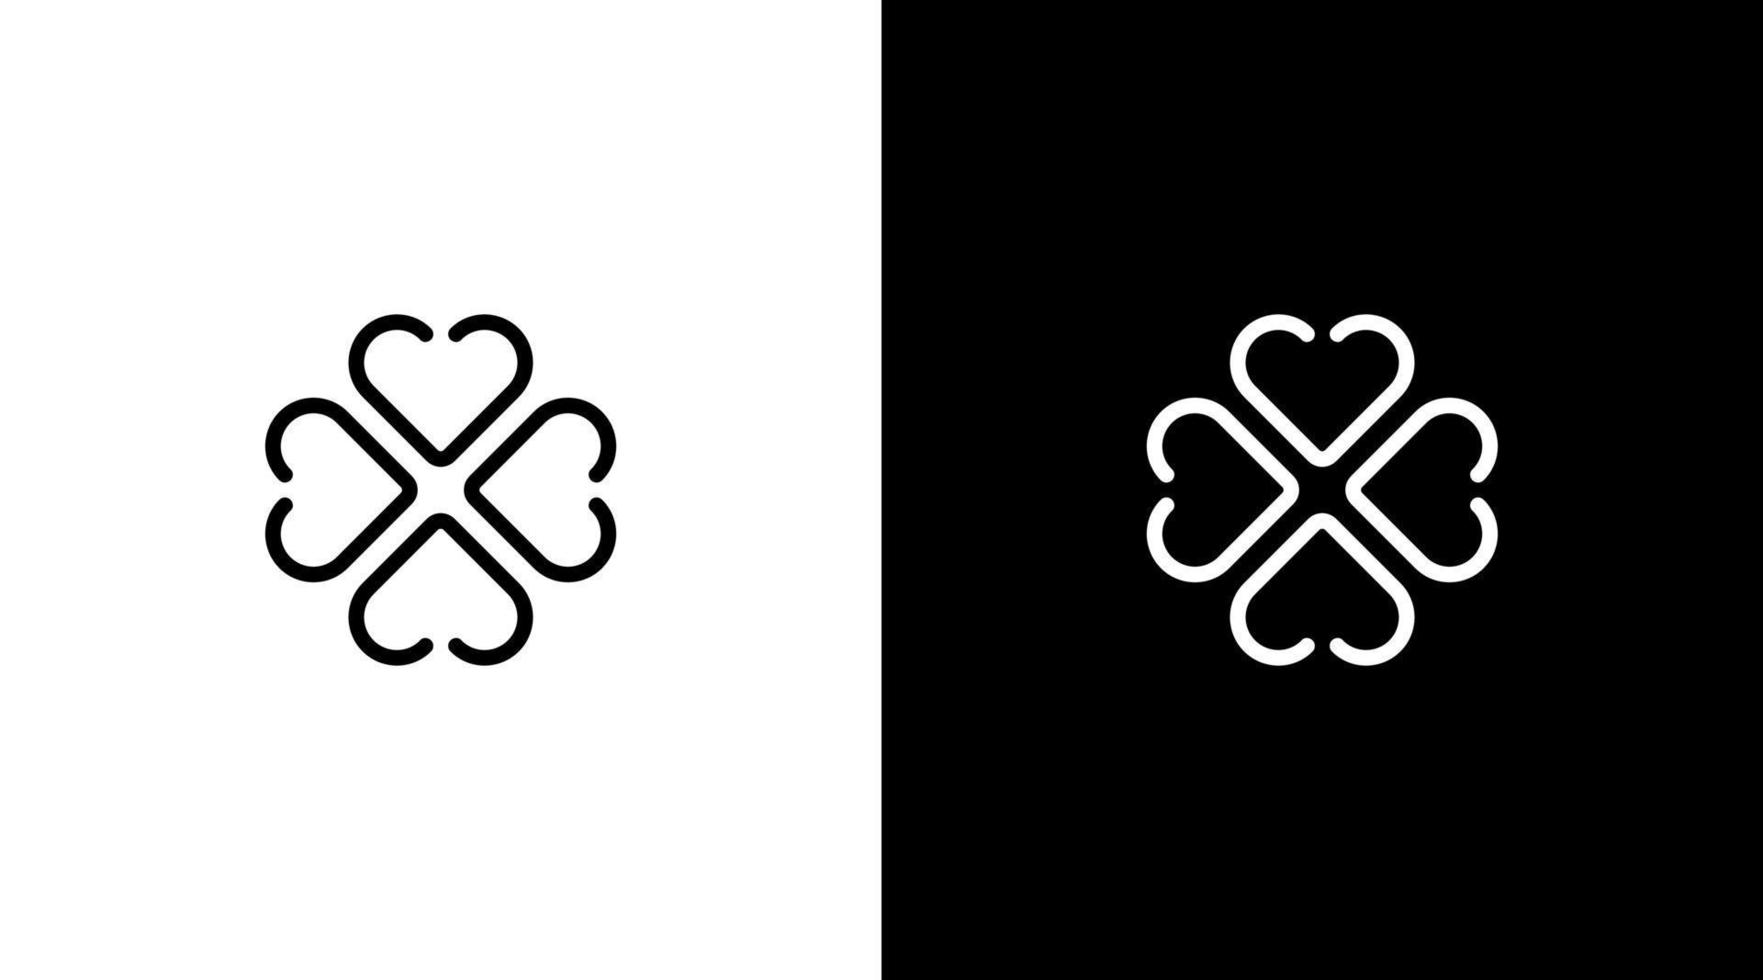 lucky clover leaf logo vector love symbol black and white icon style Design template